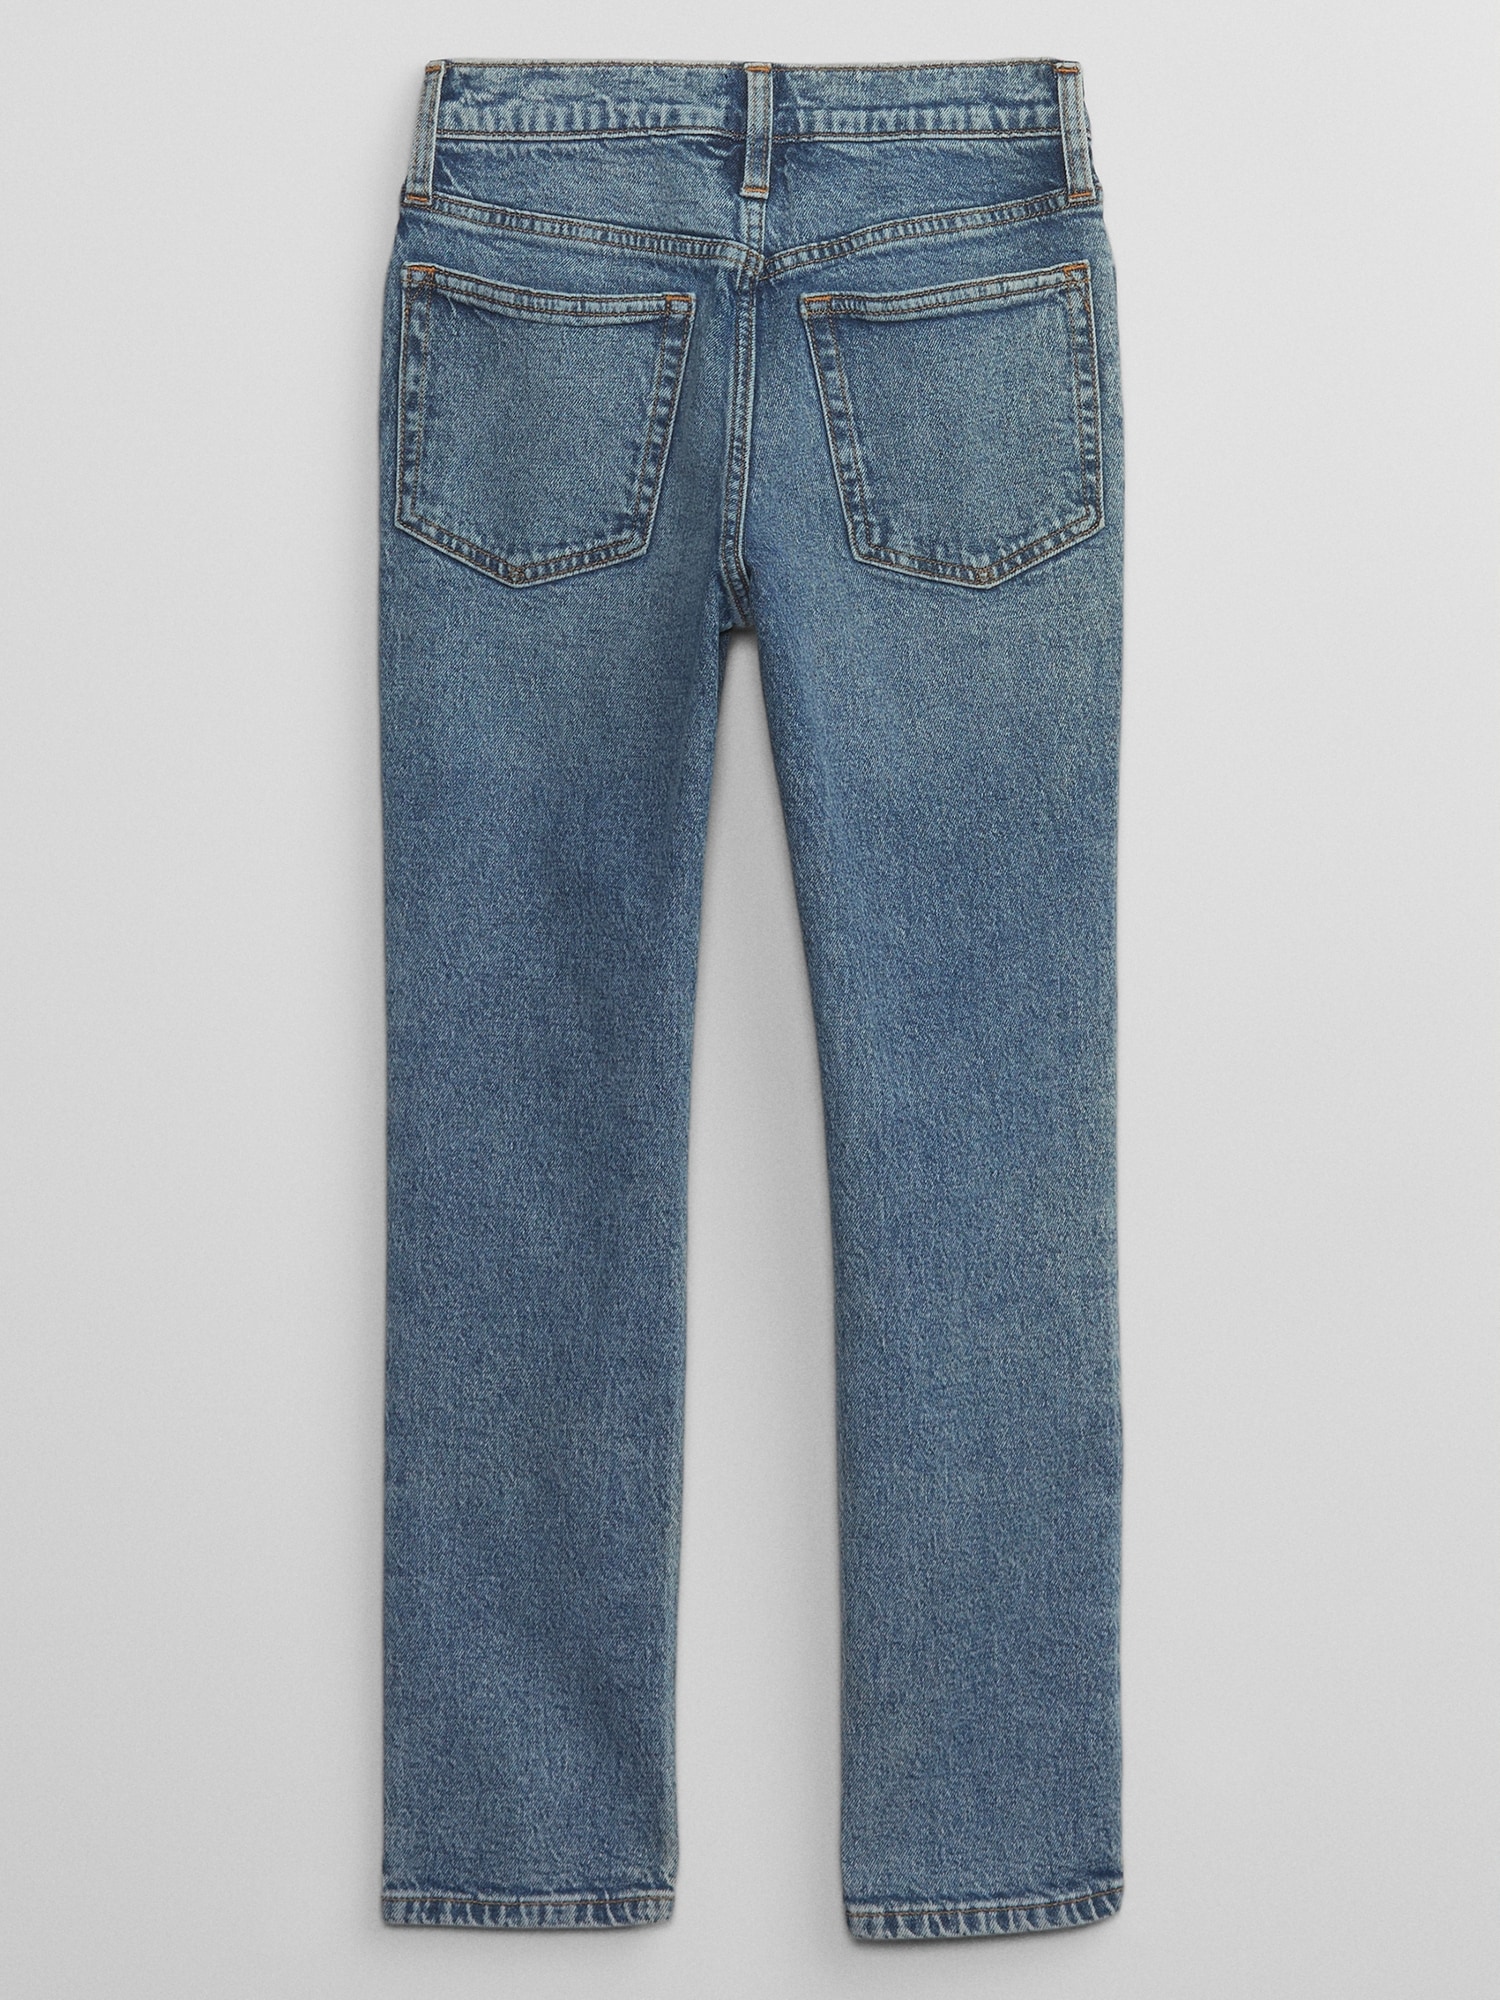 Kids Straight Taper Jeans with Washwell | Gap Factory